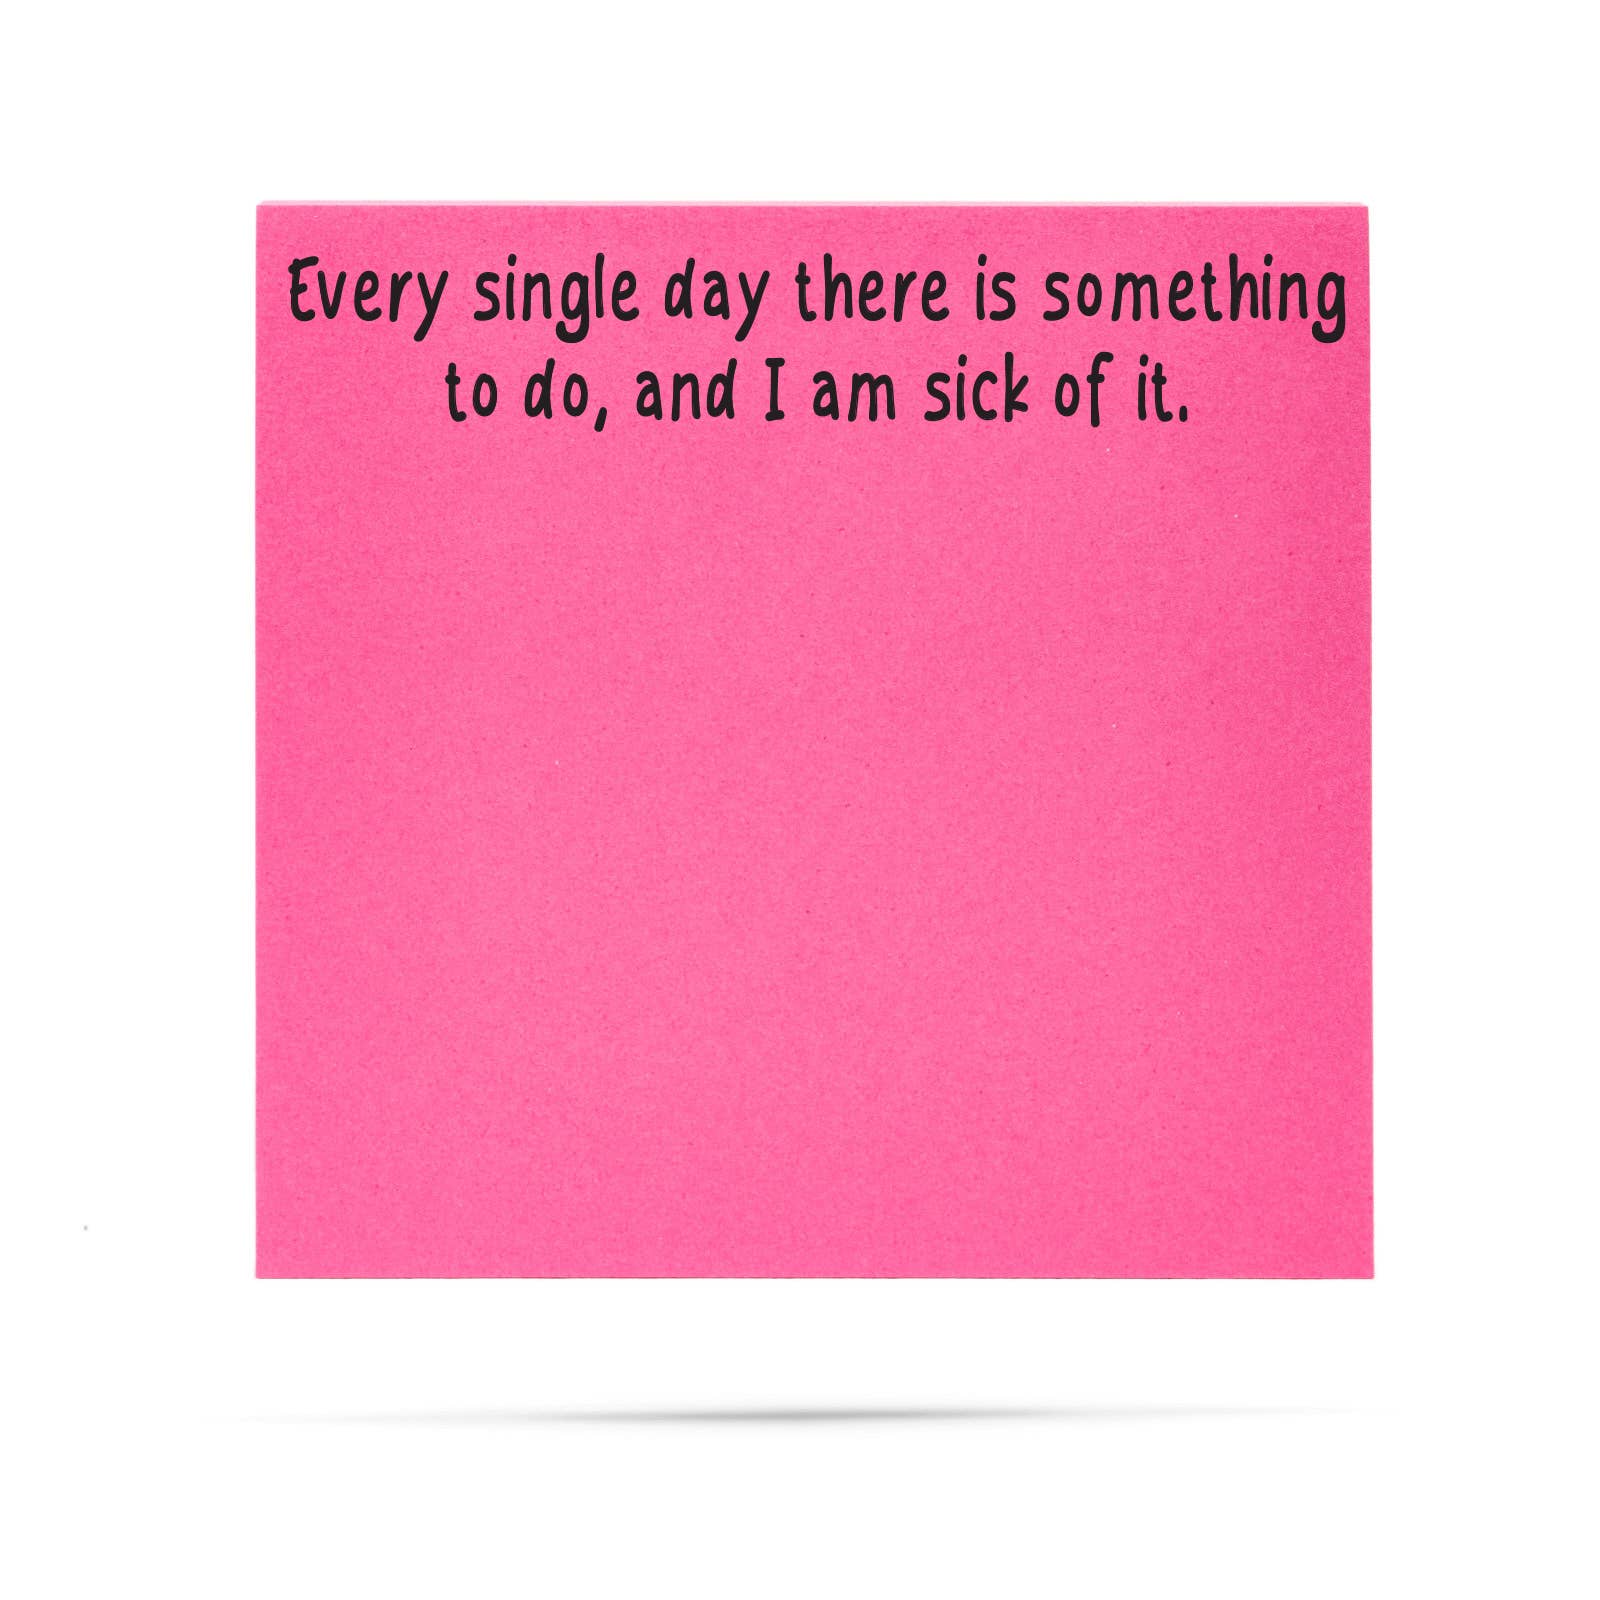 Every single day there is | funny sticky notes with sayings